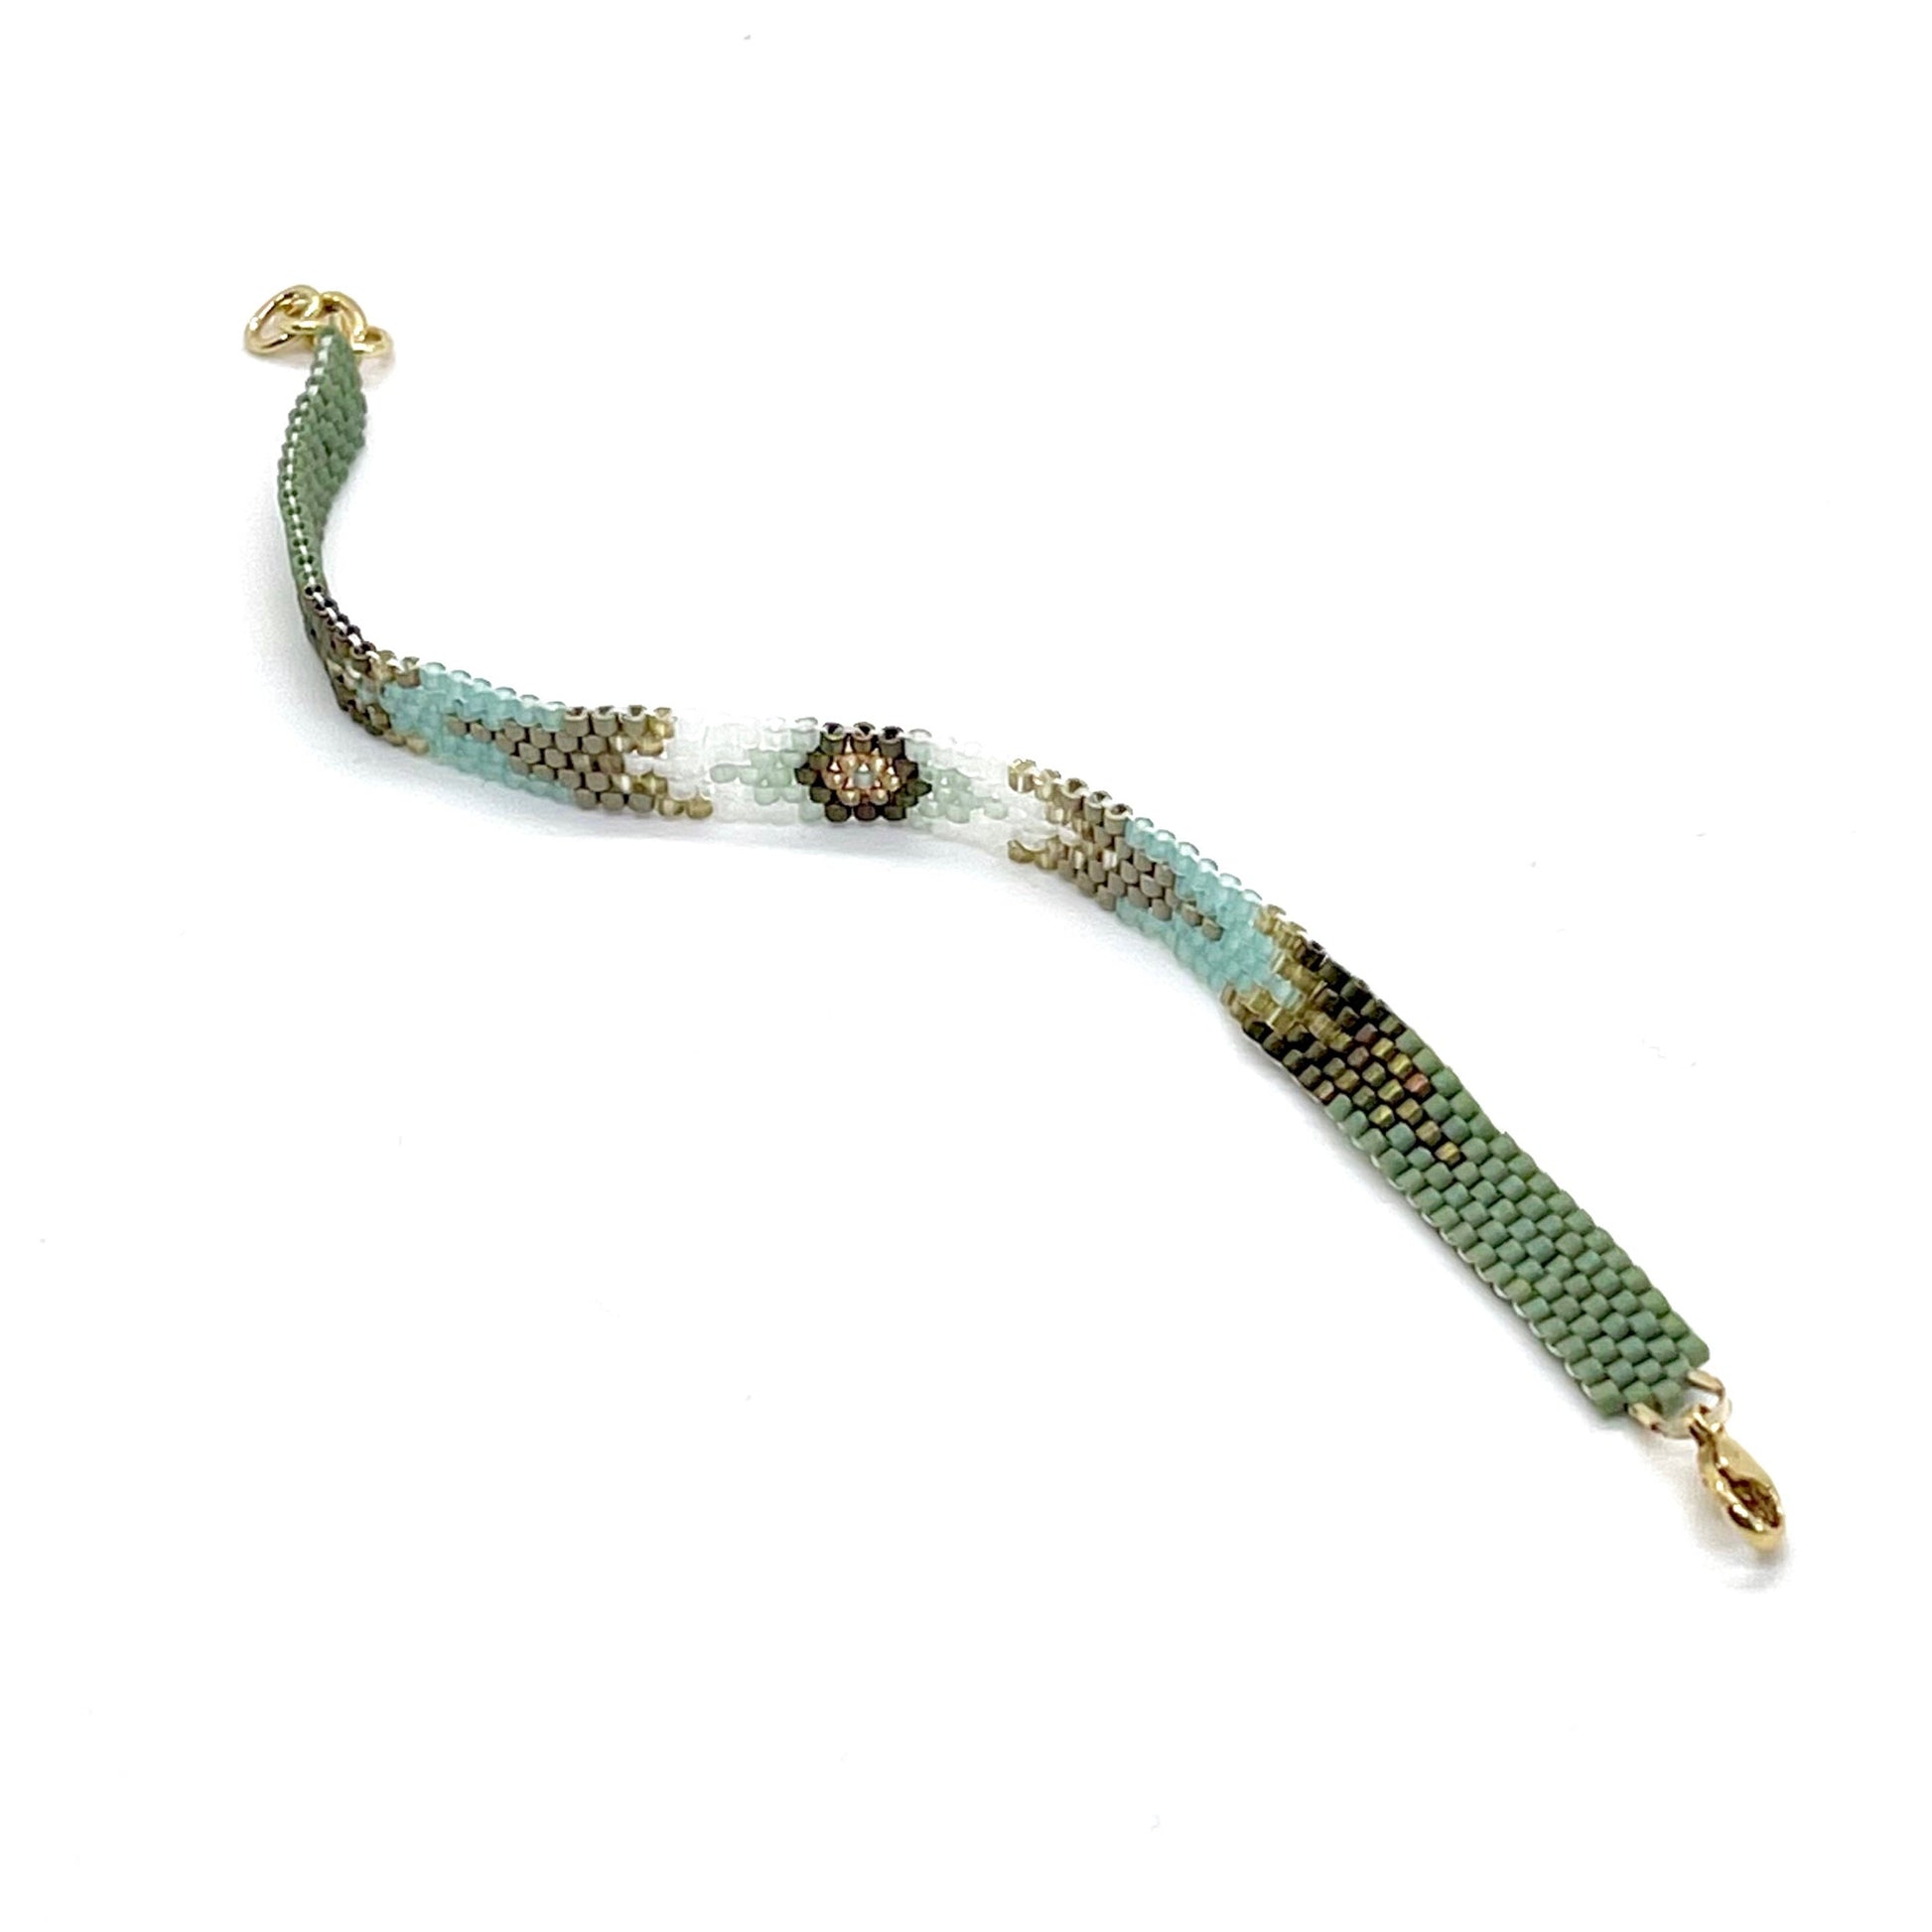 Thin beaded green bracelet cuff band with a peyote stitched arrow pattern for a boho vibe. Handmade in NYC.